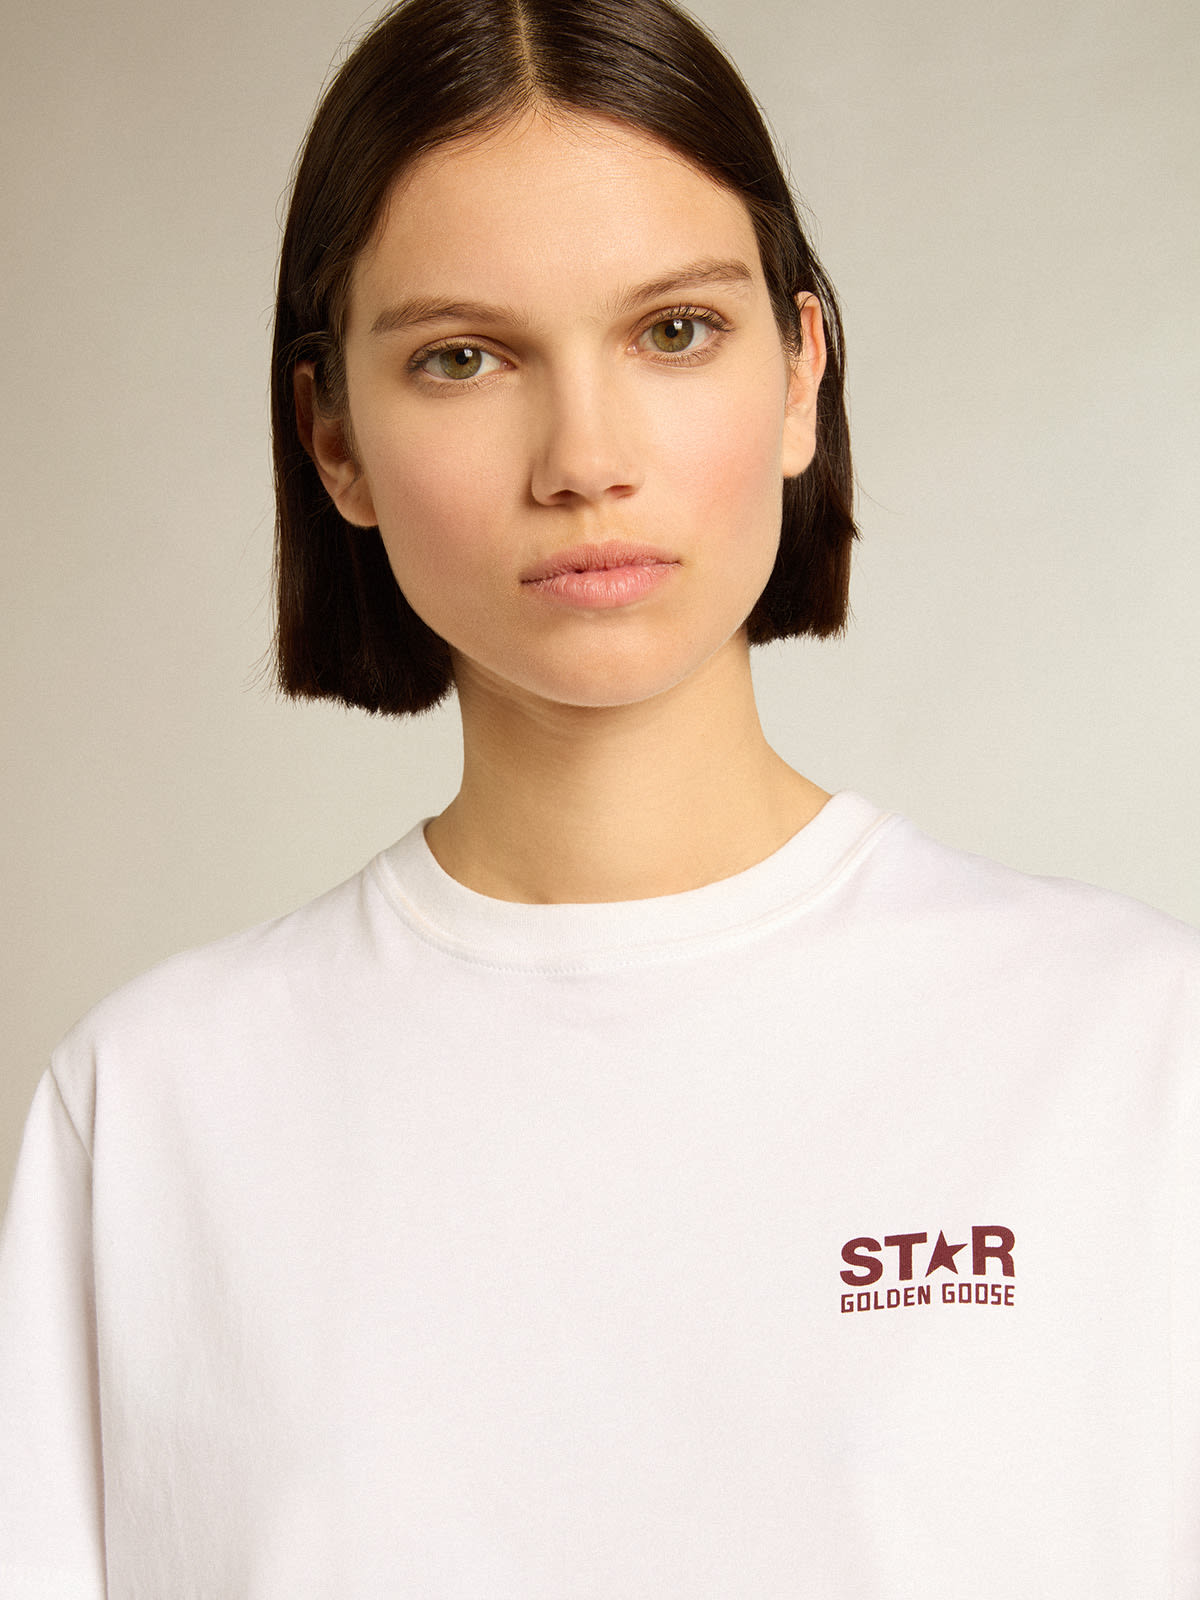 Golden Goose - Women’s white T-shirt with burgundy star on the front in 